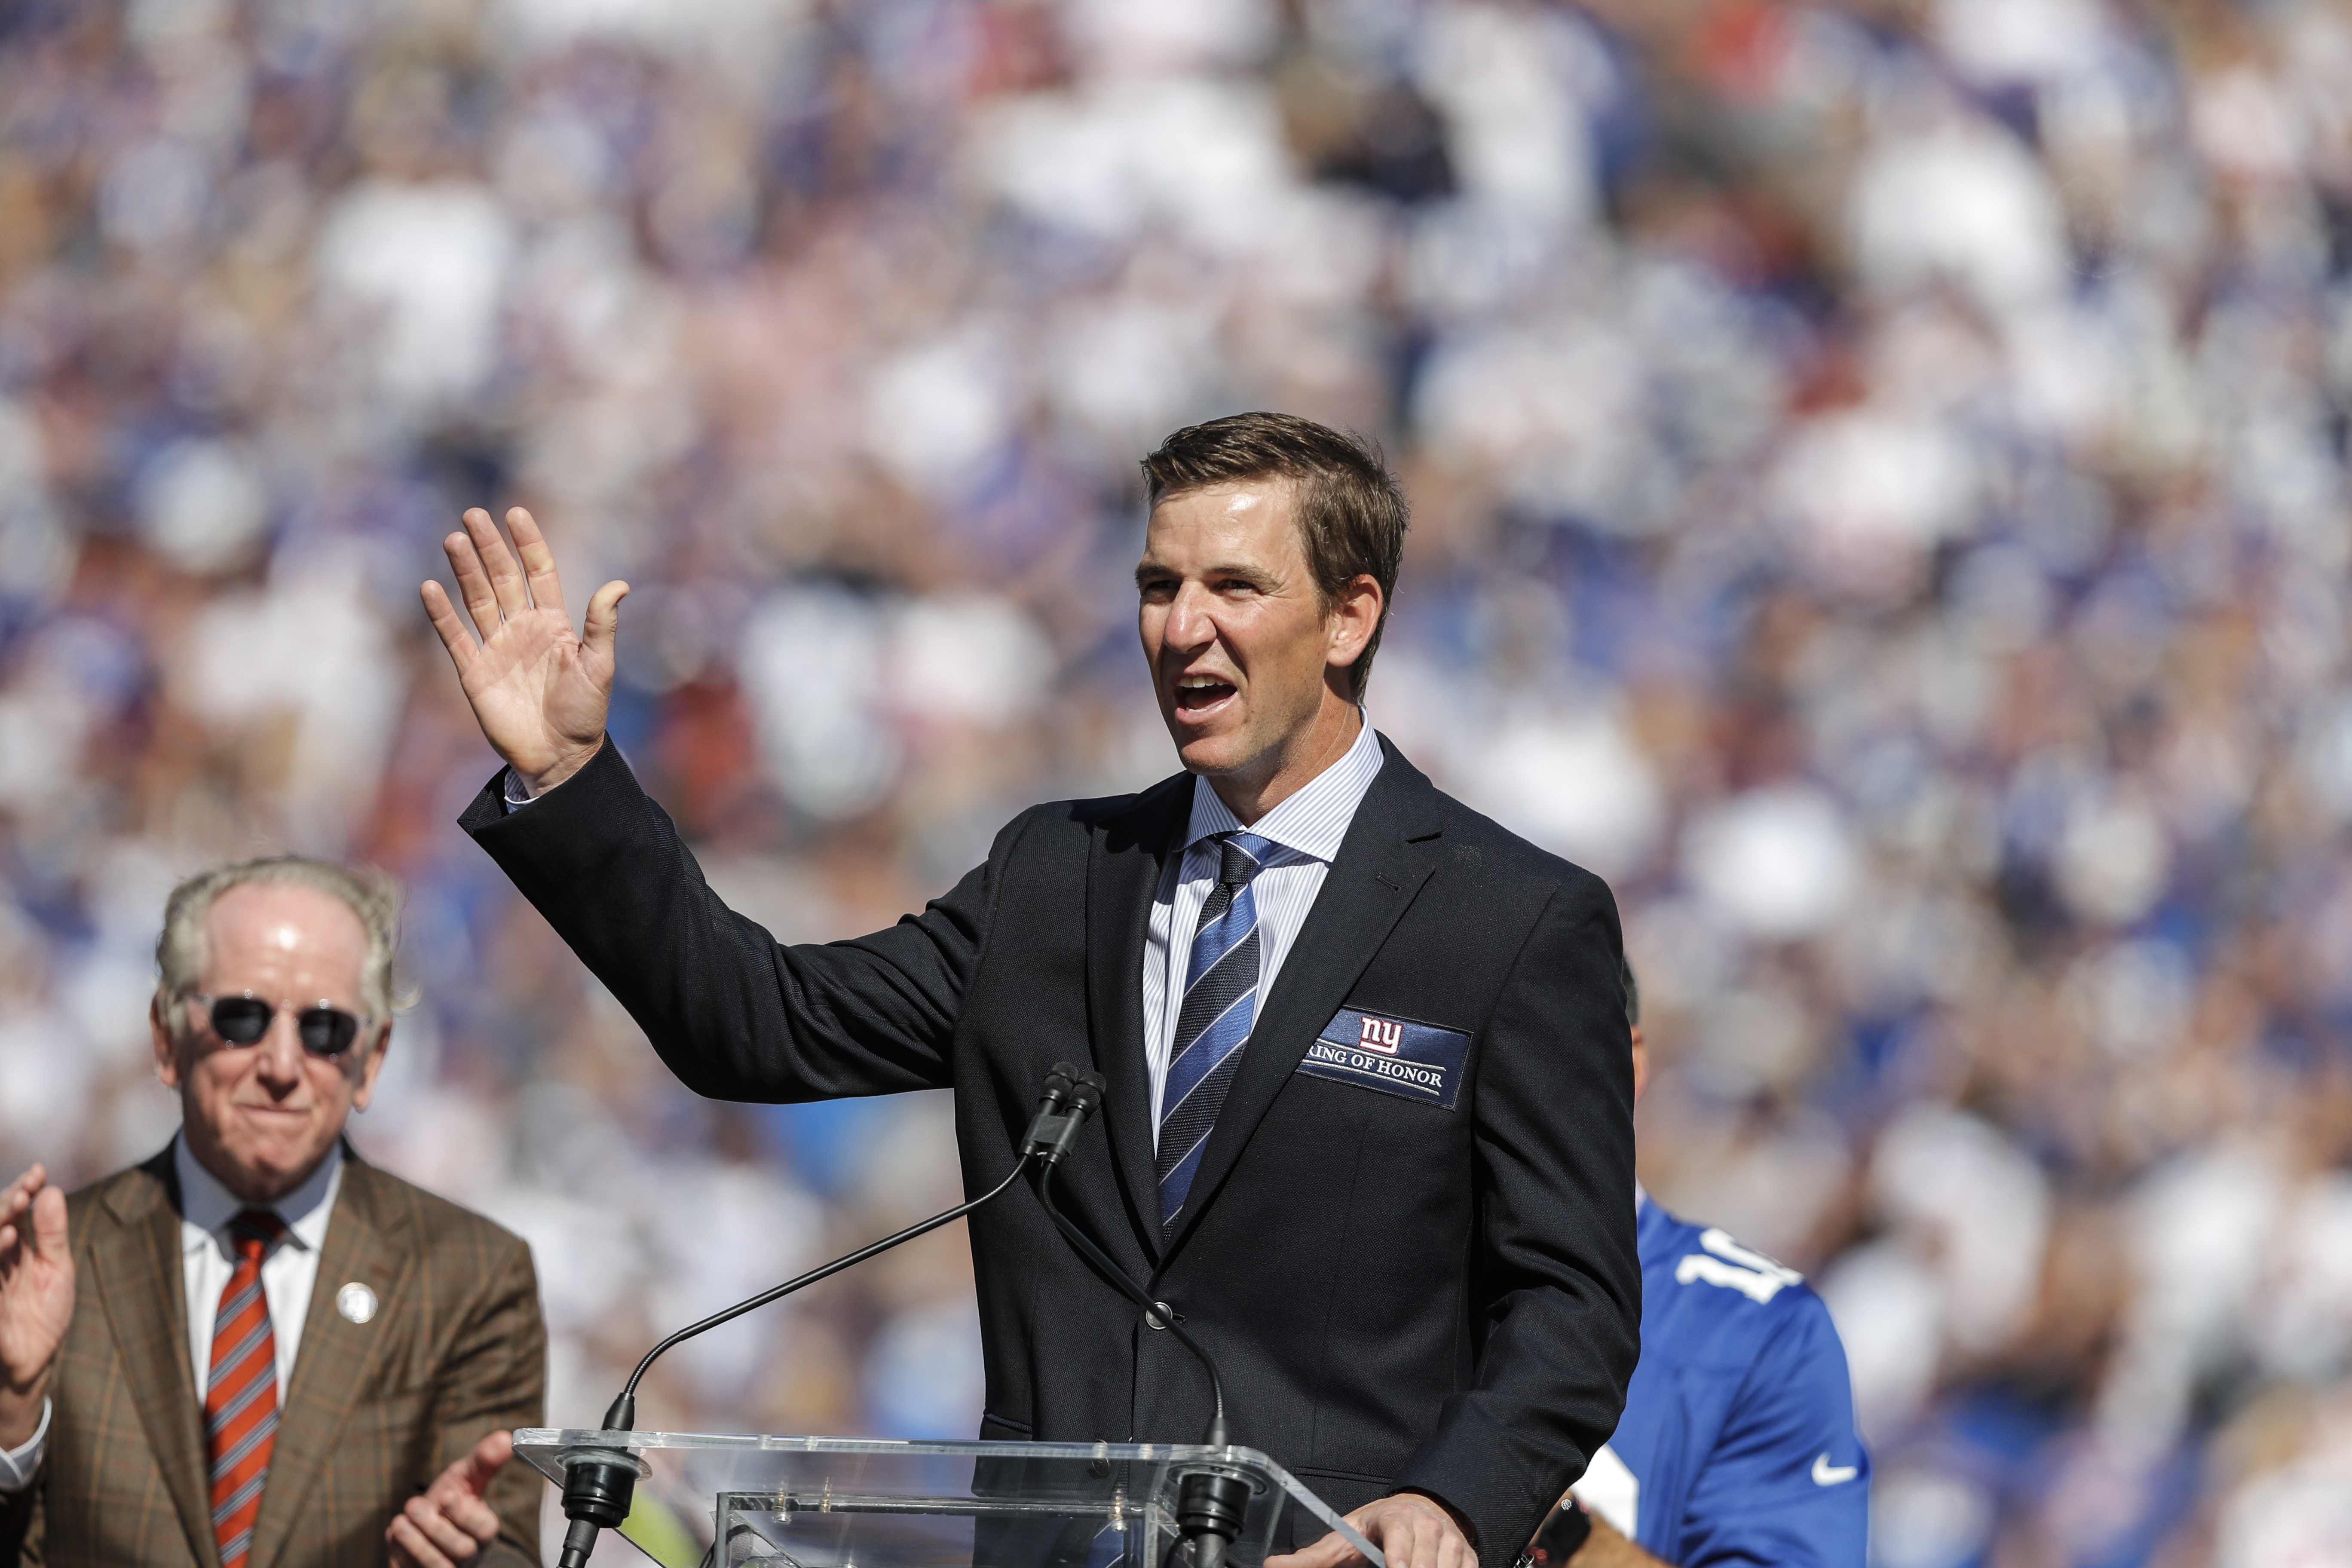 He always wanted to take it on his shoulders - Former Giants player  reveals how he admired Eli Manning's unparalleled leadership